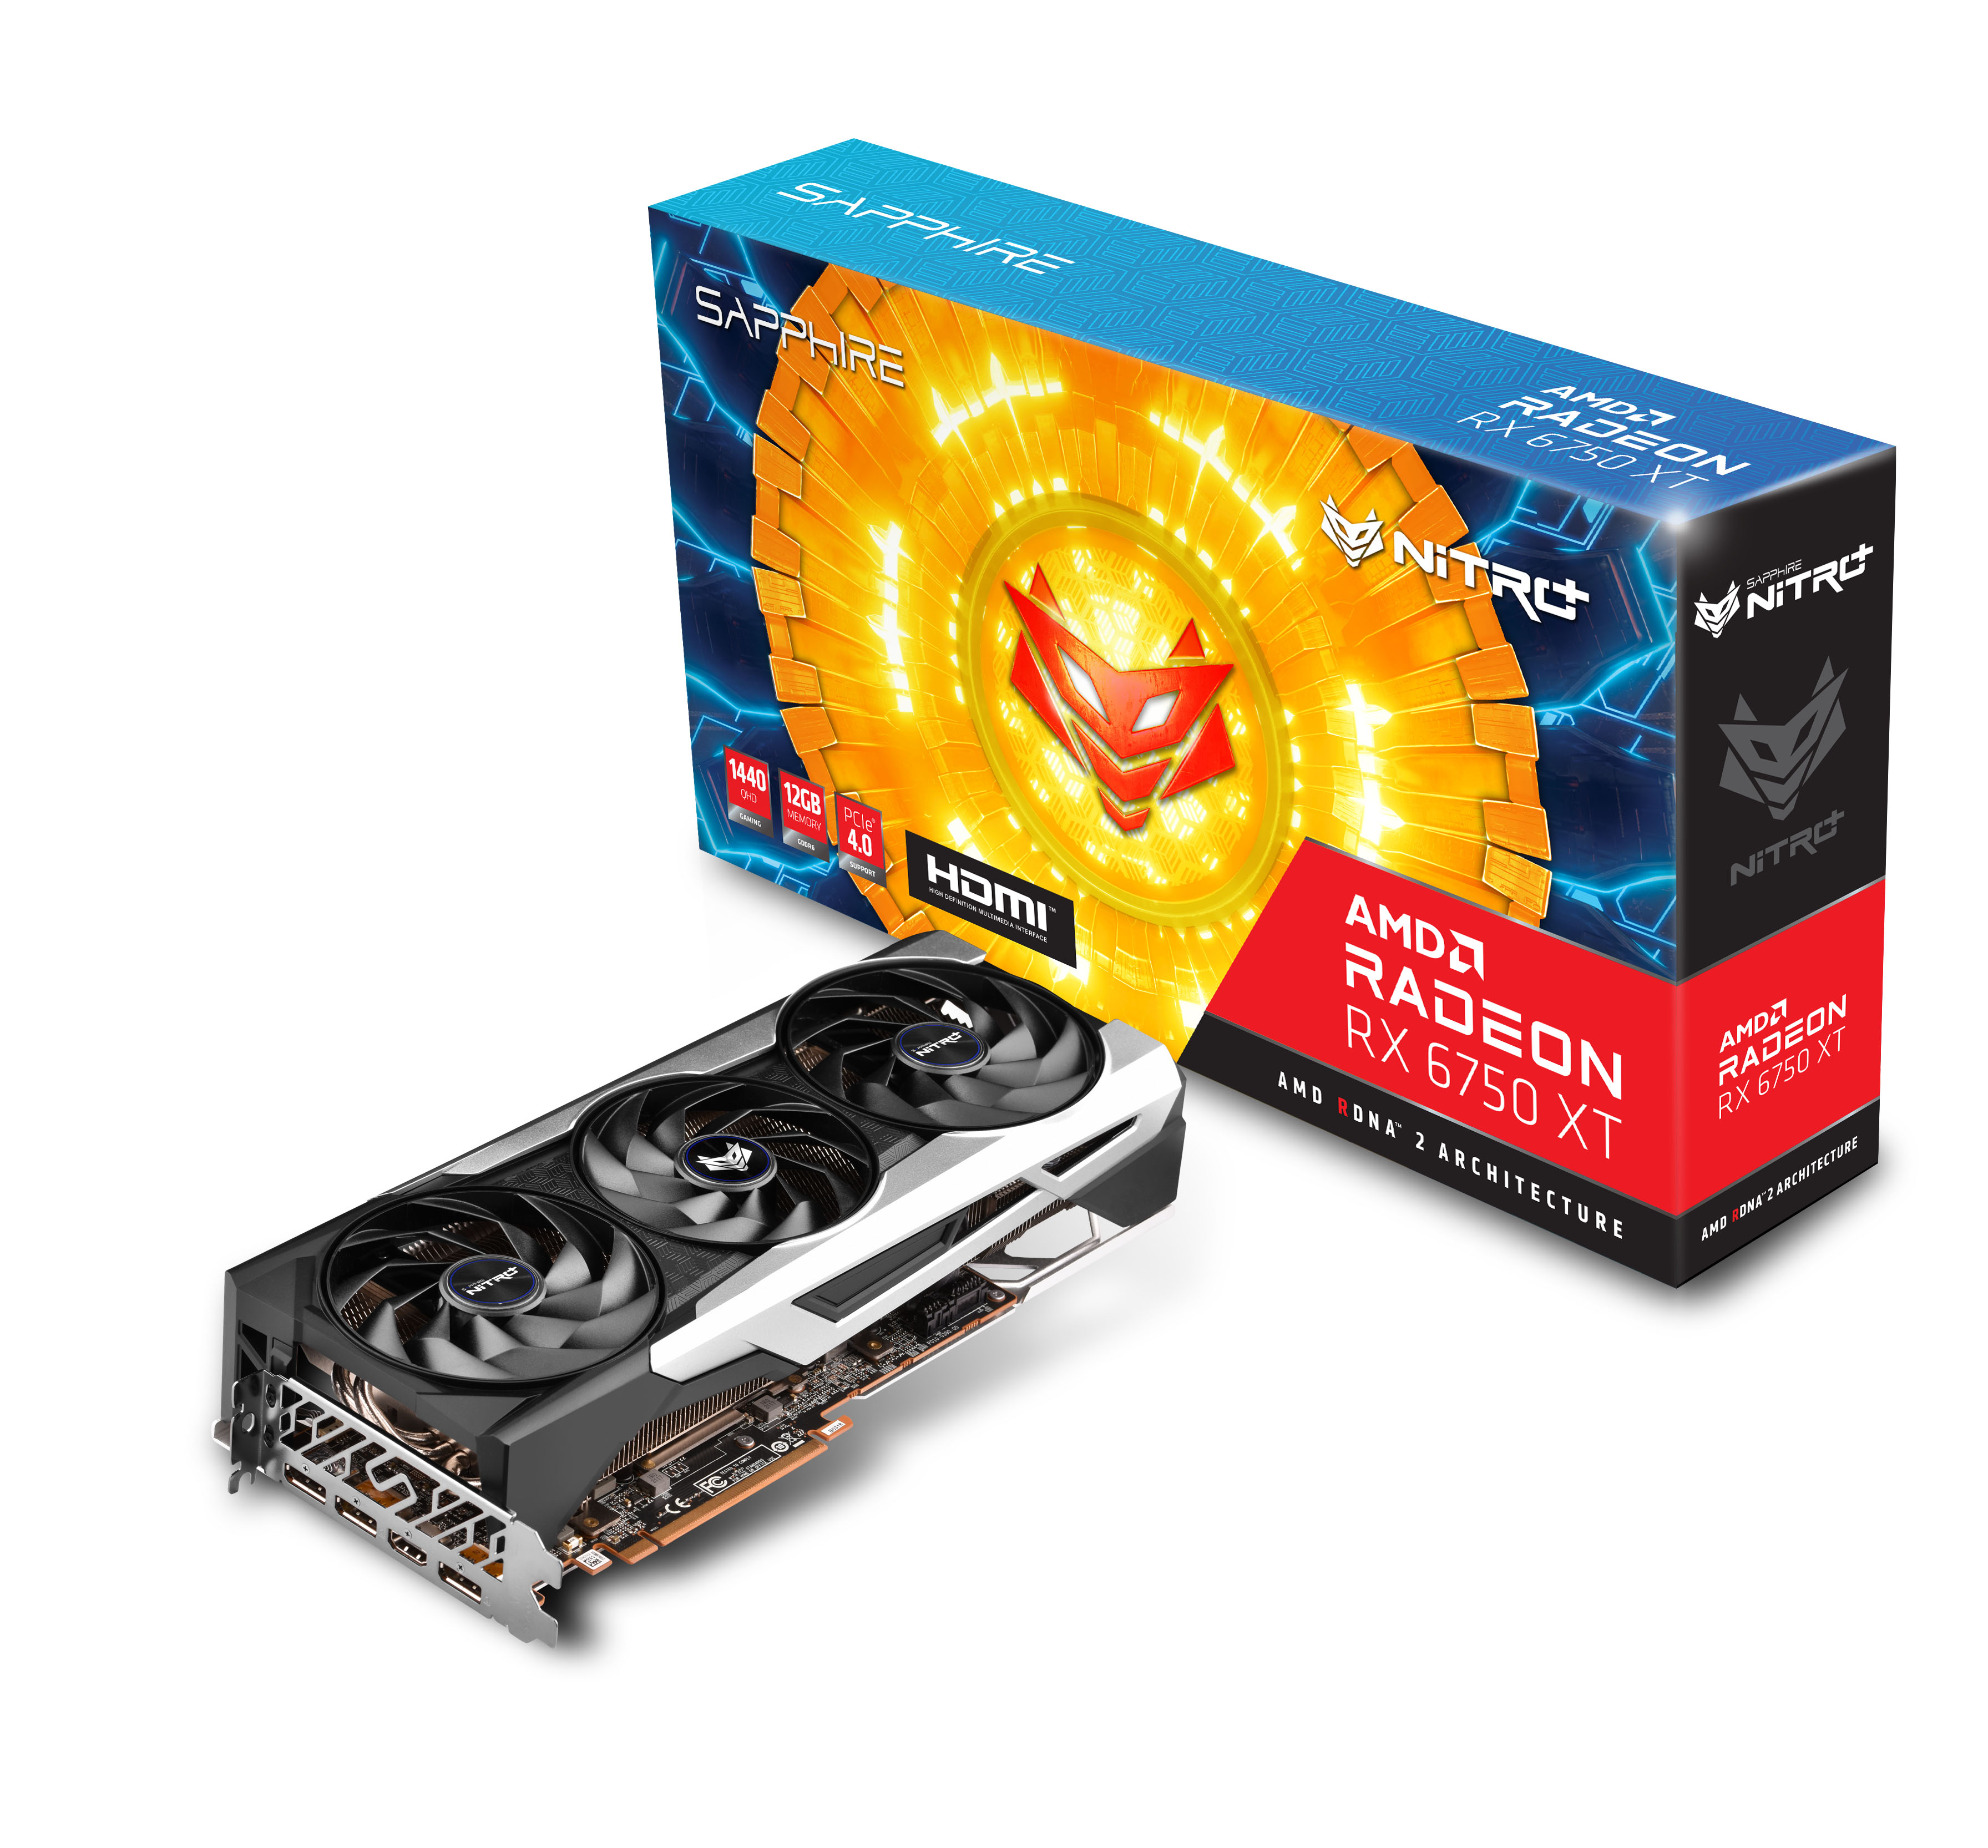 sapphire-nitro-radeon-rx-6750-xt-desktop-gpu-in-review-fast-1440p-graphics-card-with-a-massive-cooler